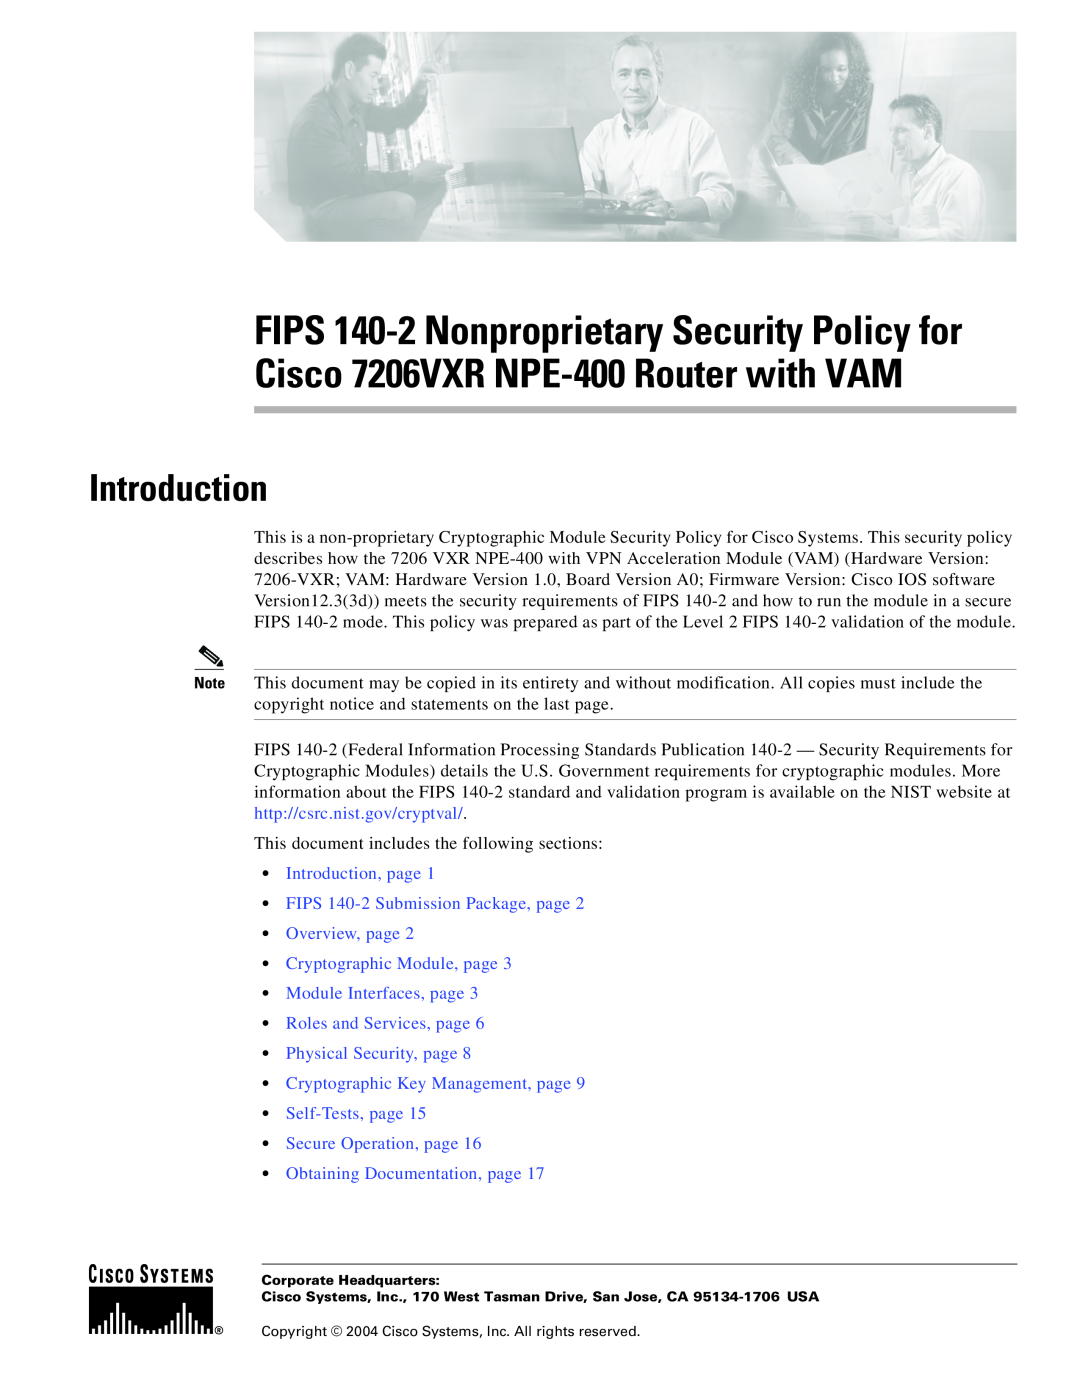 Cisco Systems 7206VXR NPE-400 manual Introduction, page FIPS 140-2 Submission Package, page Overview, page 